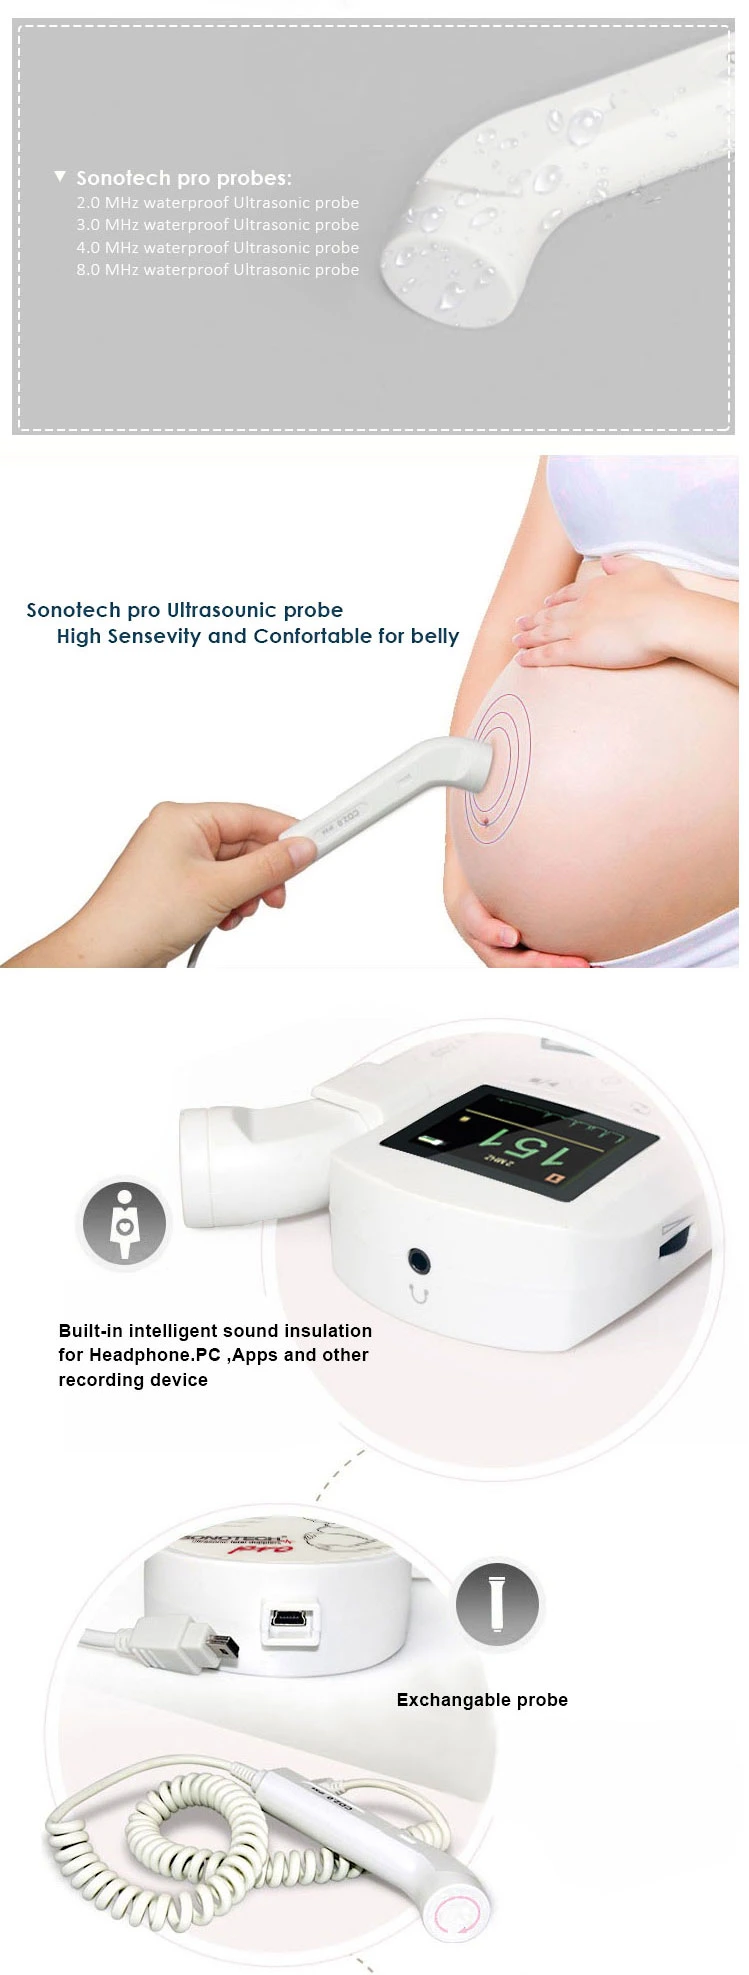 CE Marked Big Color Display Fetal Monitor /Baby Heartbeat Fetal Doppler Price